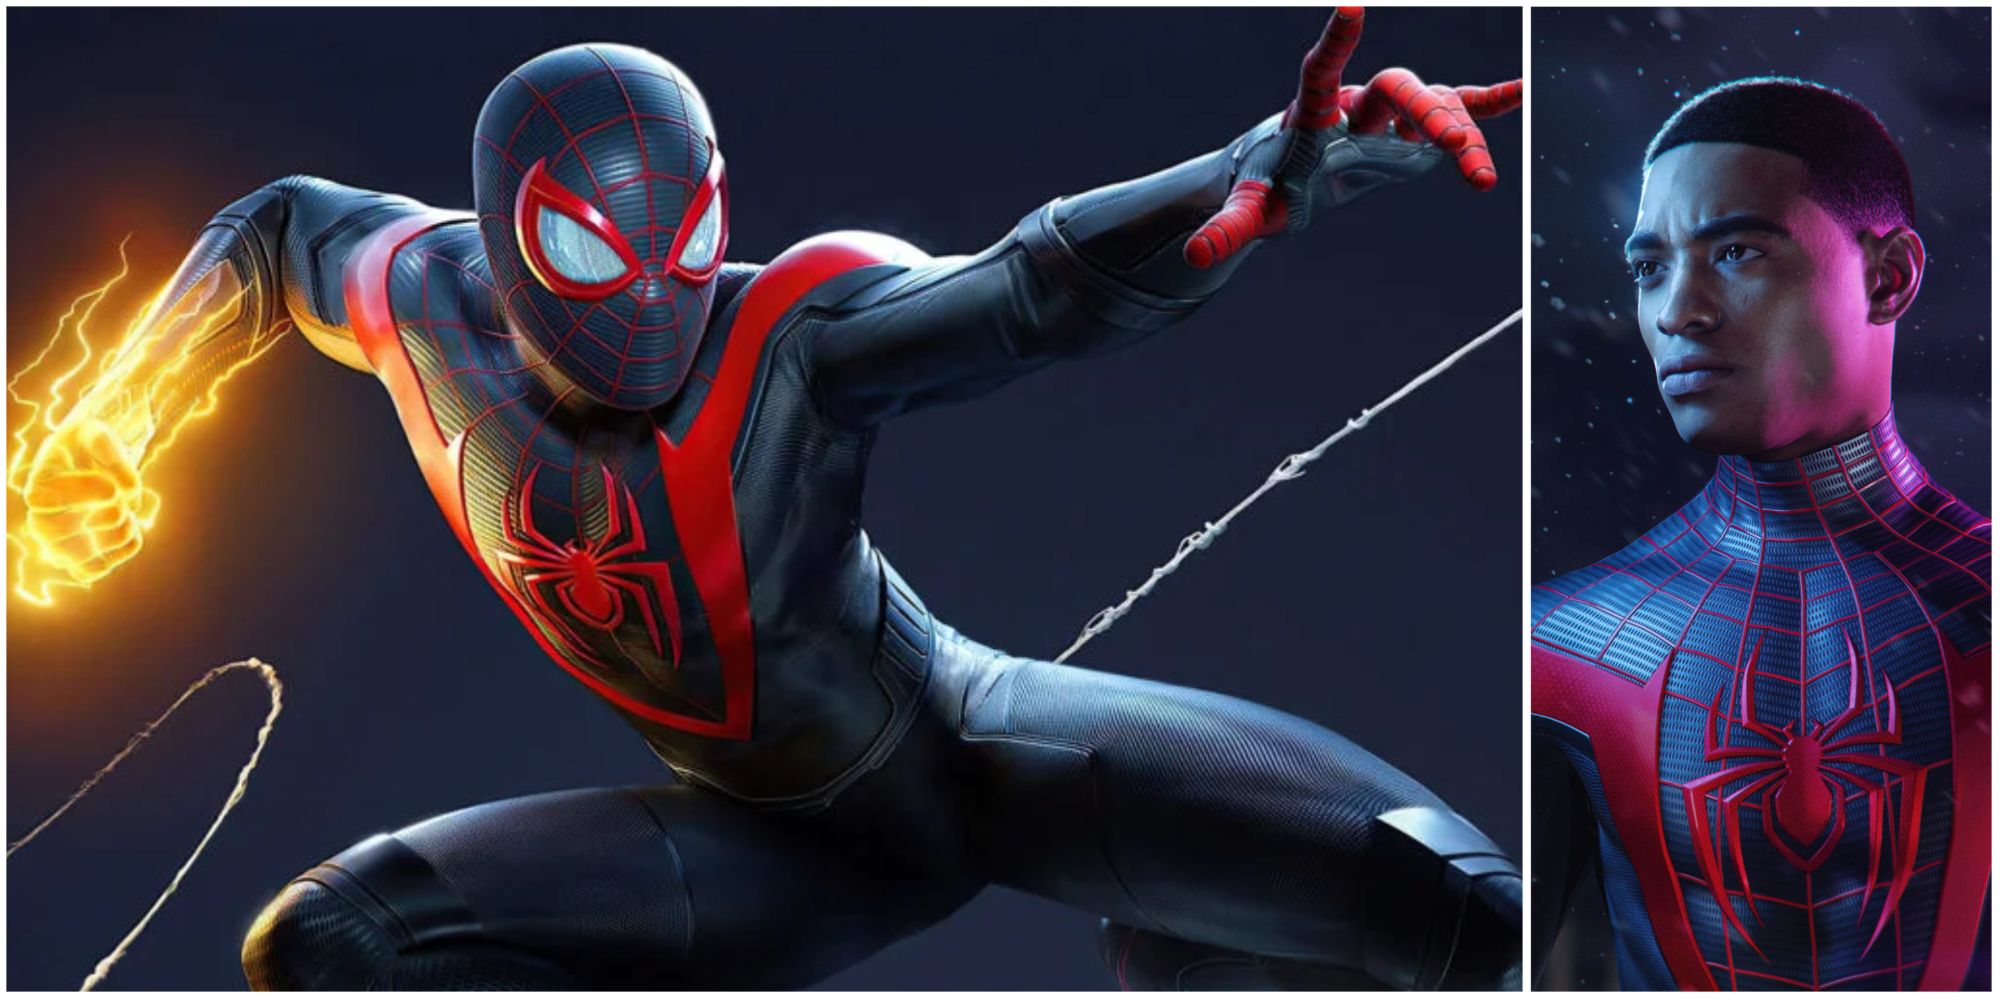 How To Shoot Tethered Web in Spider-Man: Miles Morales